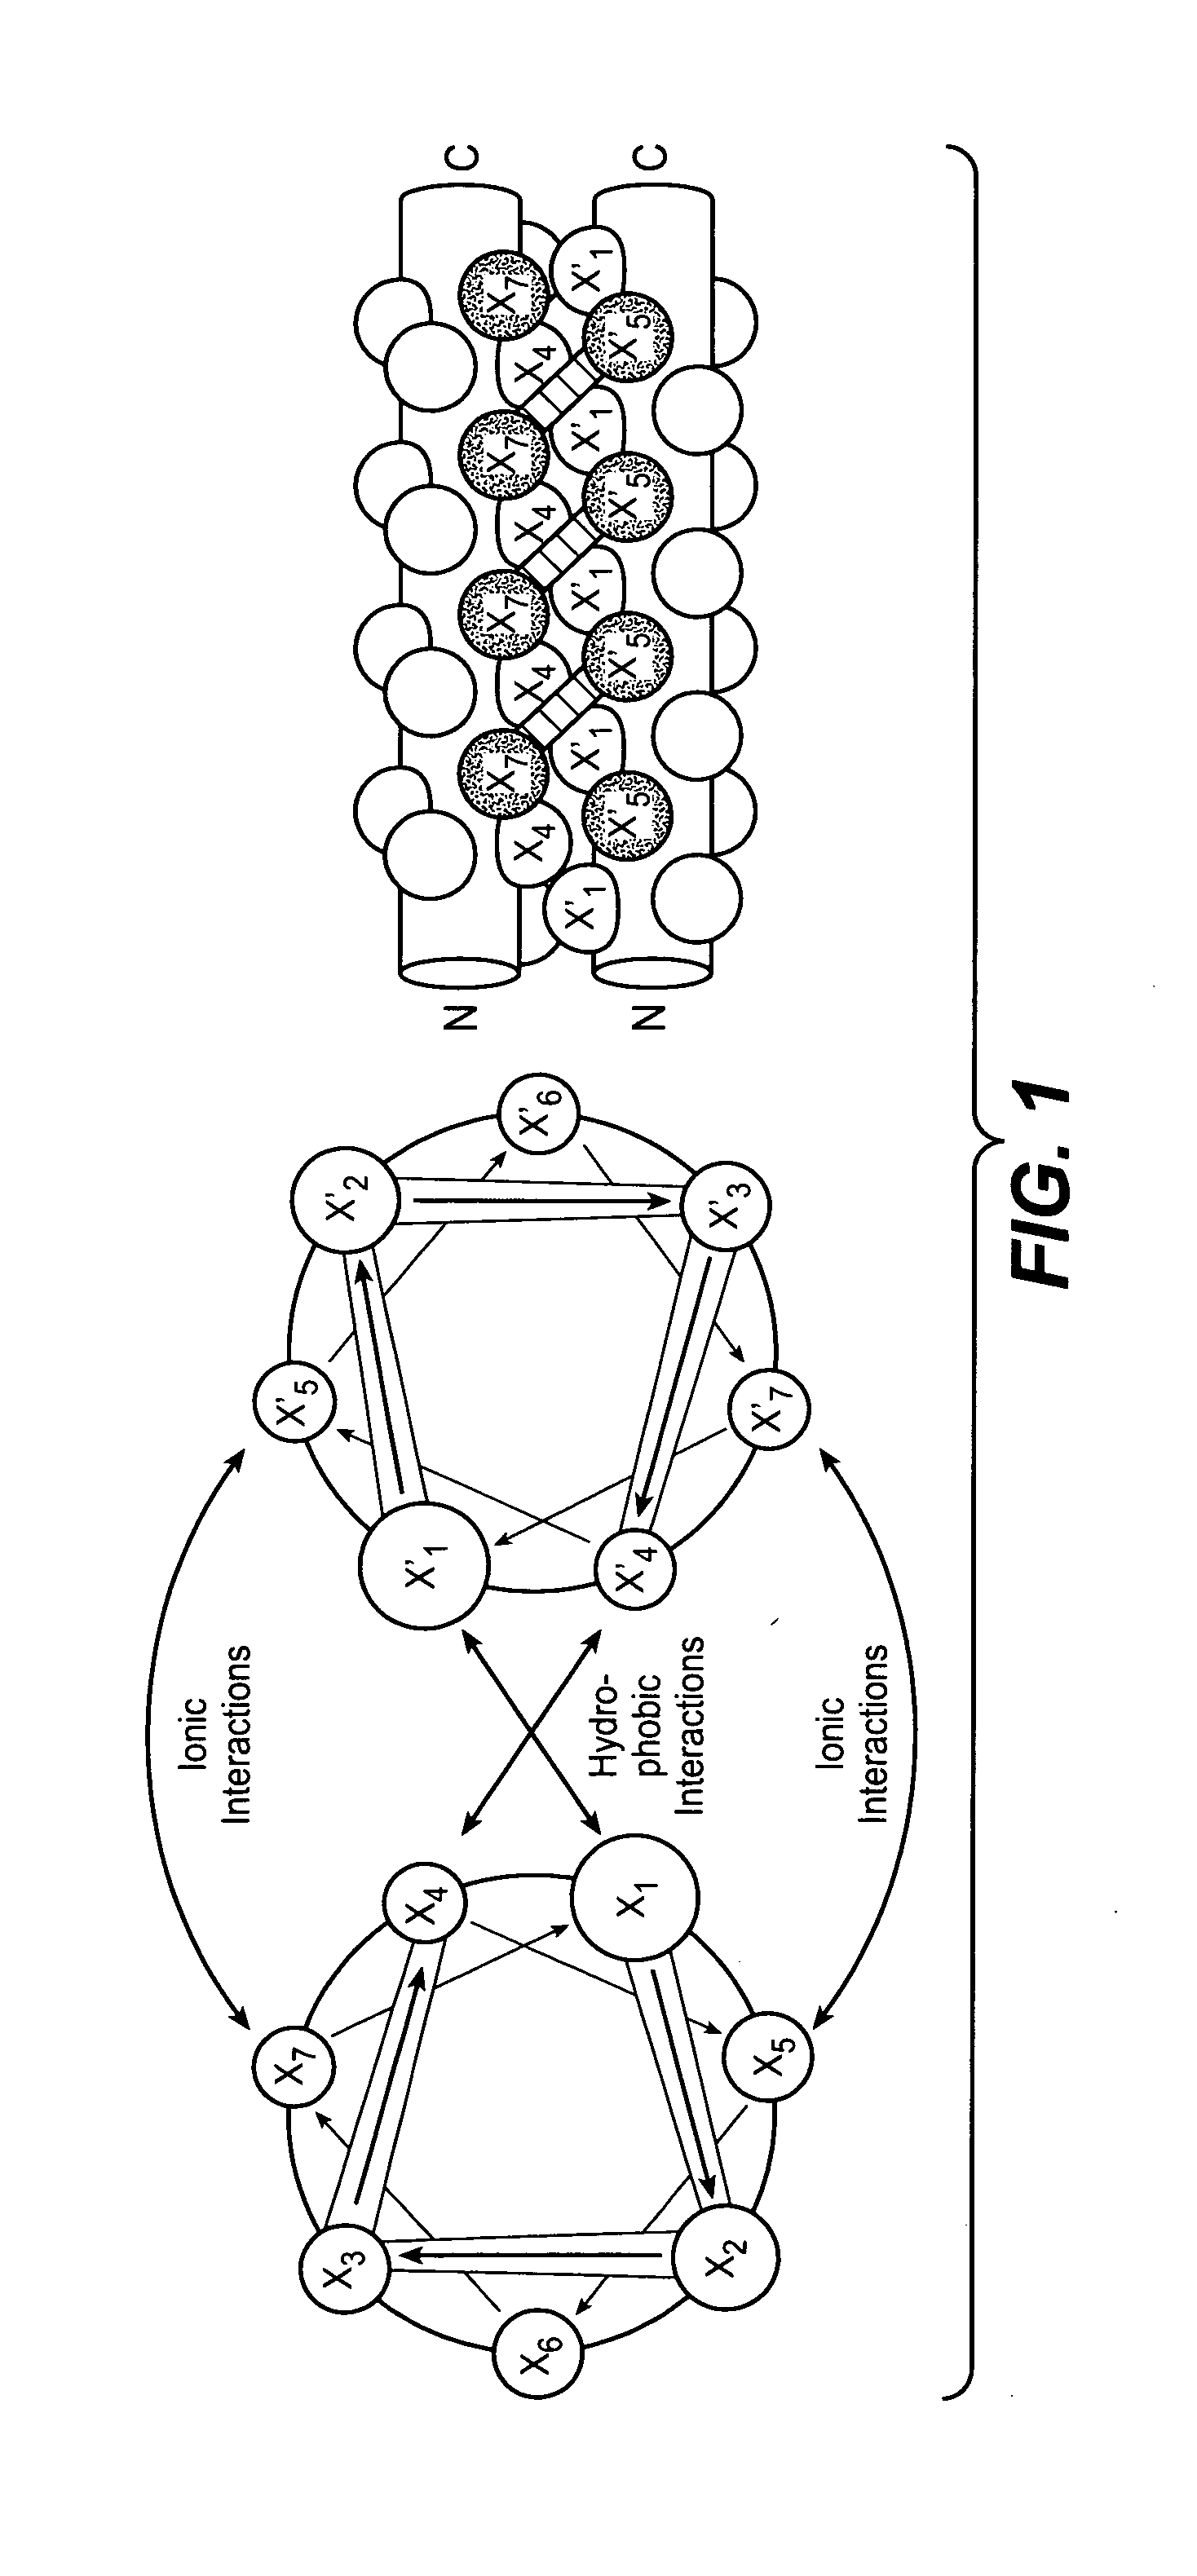 Coiled coil and/or tether containing protein complexes and uses thereof